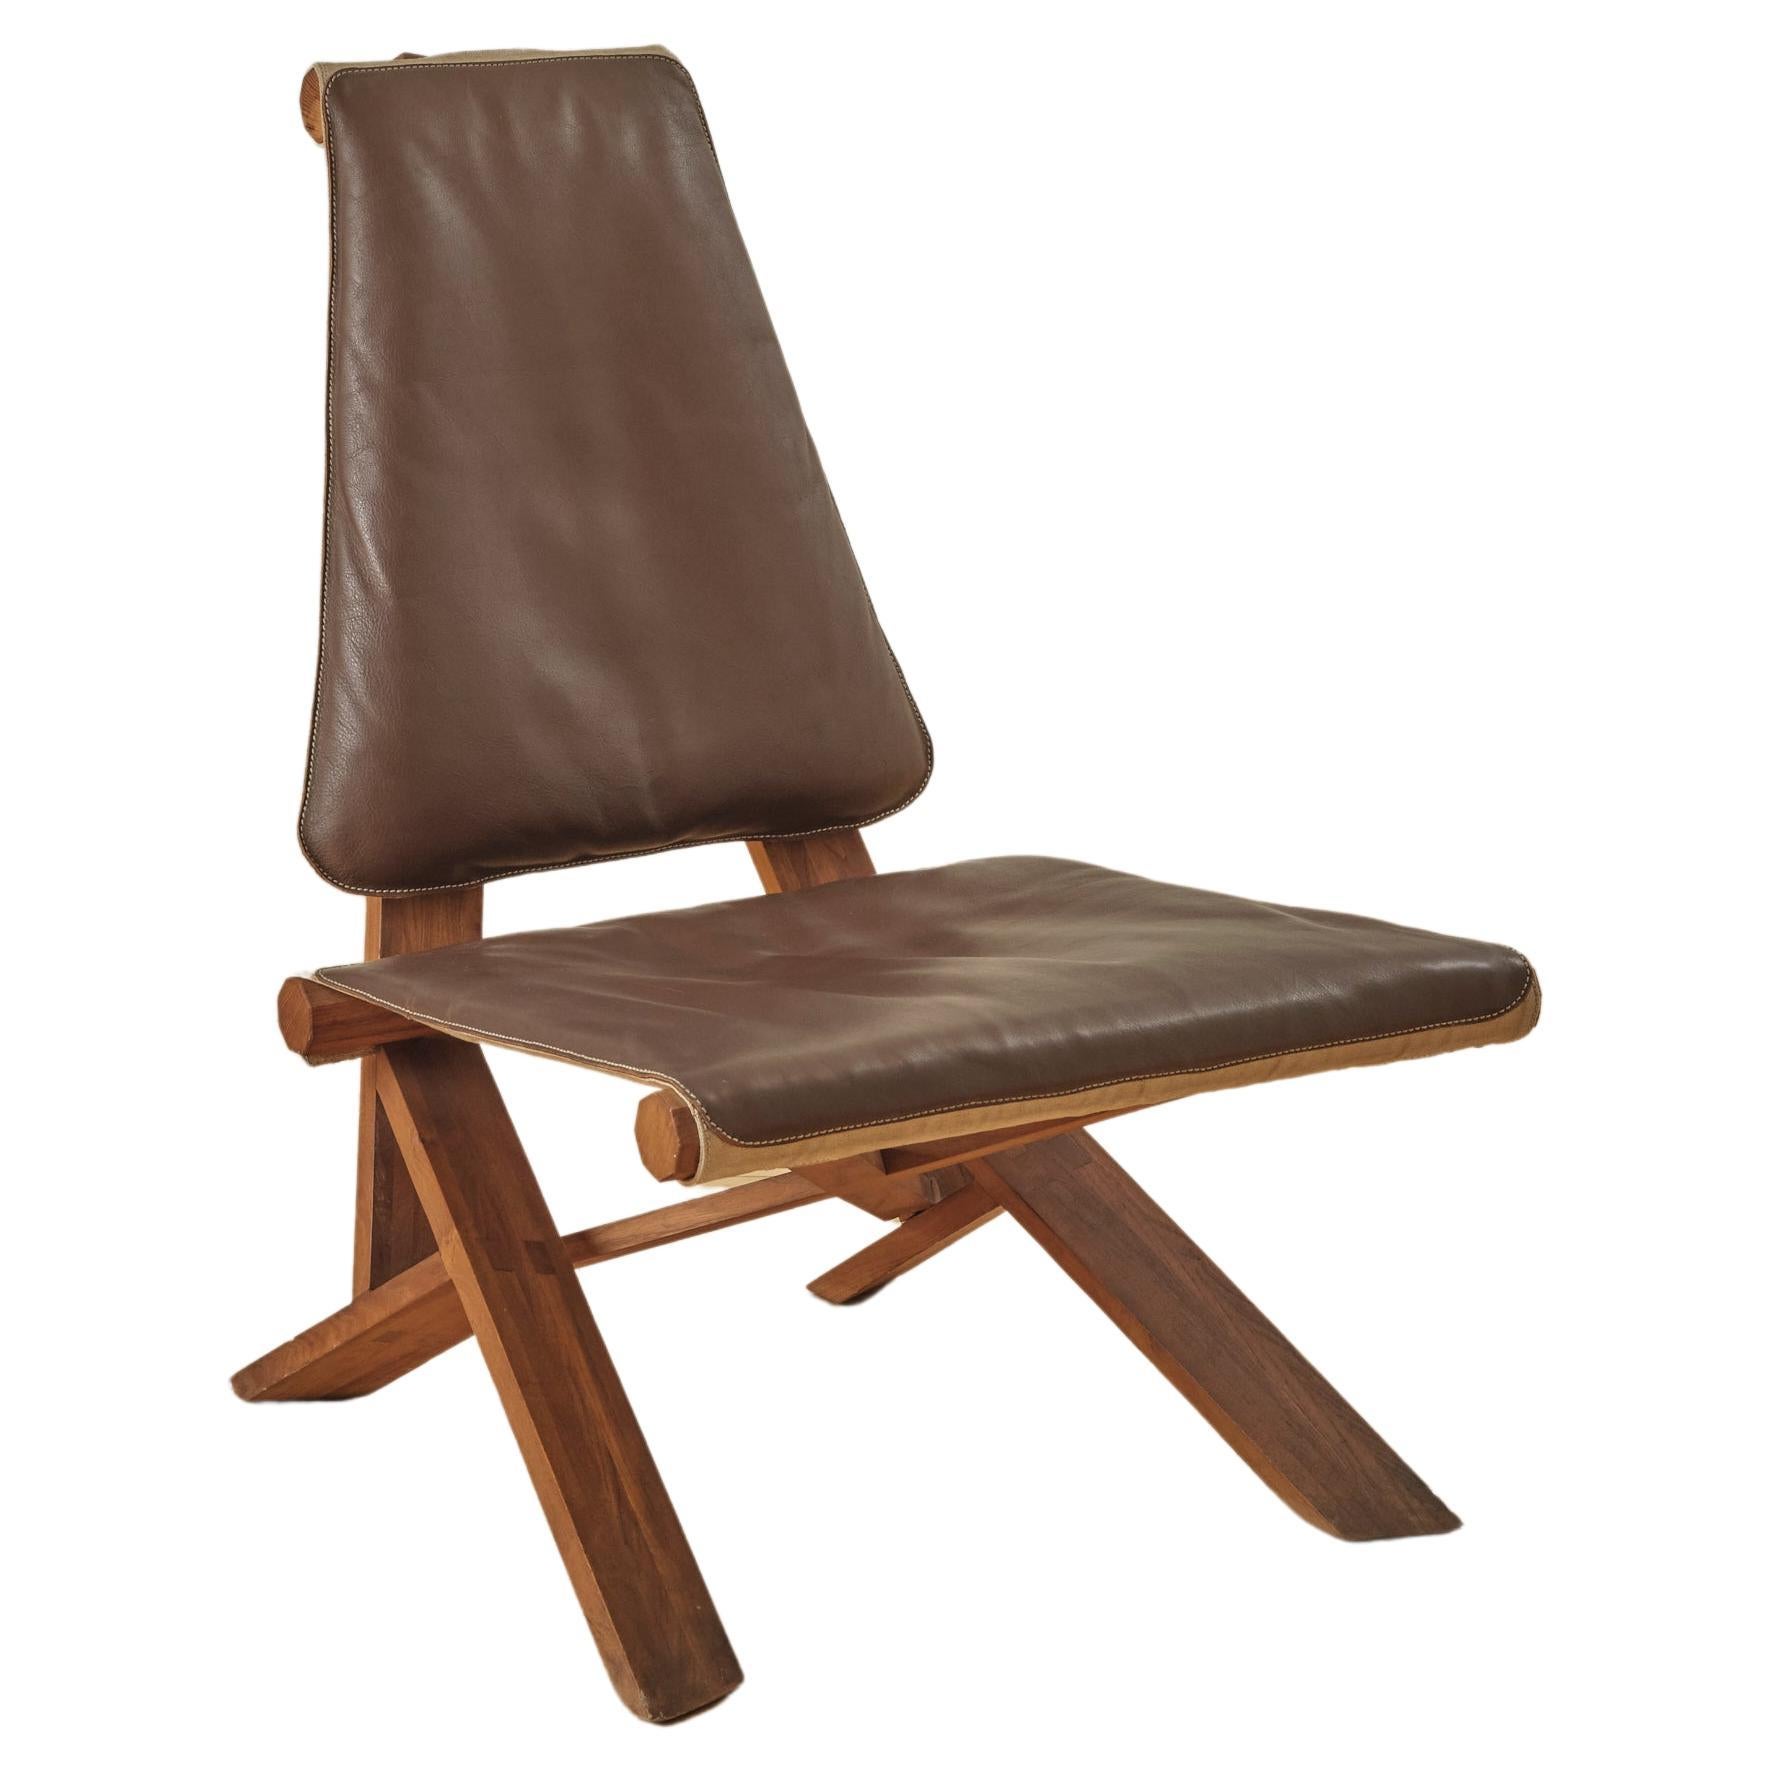 S46 "Dromadaire" Lounge Chair by Pierre Chapo